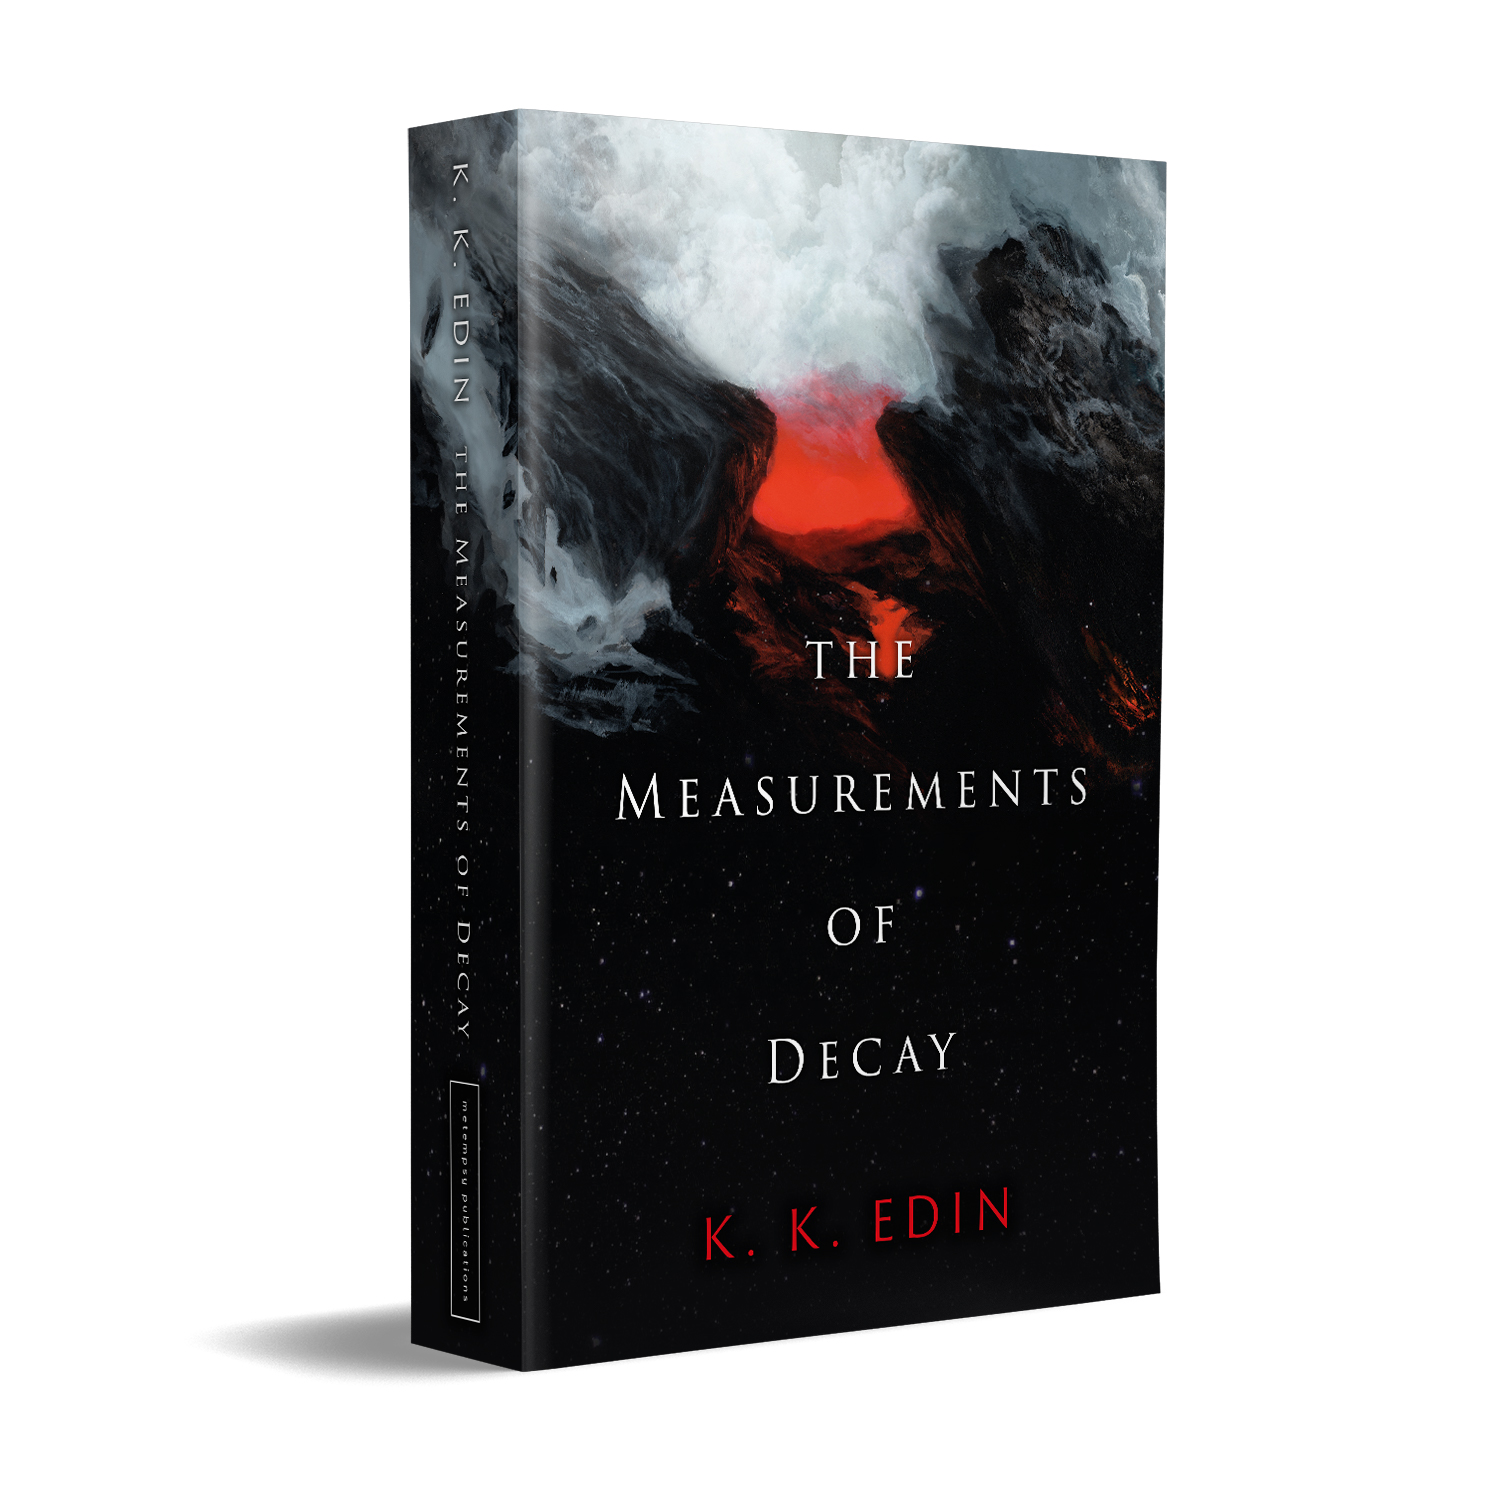 'The Measurements of Decay' is a bespoke cover design for a modern classic scifi novel. The book cover was designed by Mark Thomas, of coverness.com. To find out more about my book design services, please visit www.coverness.com.